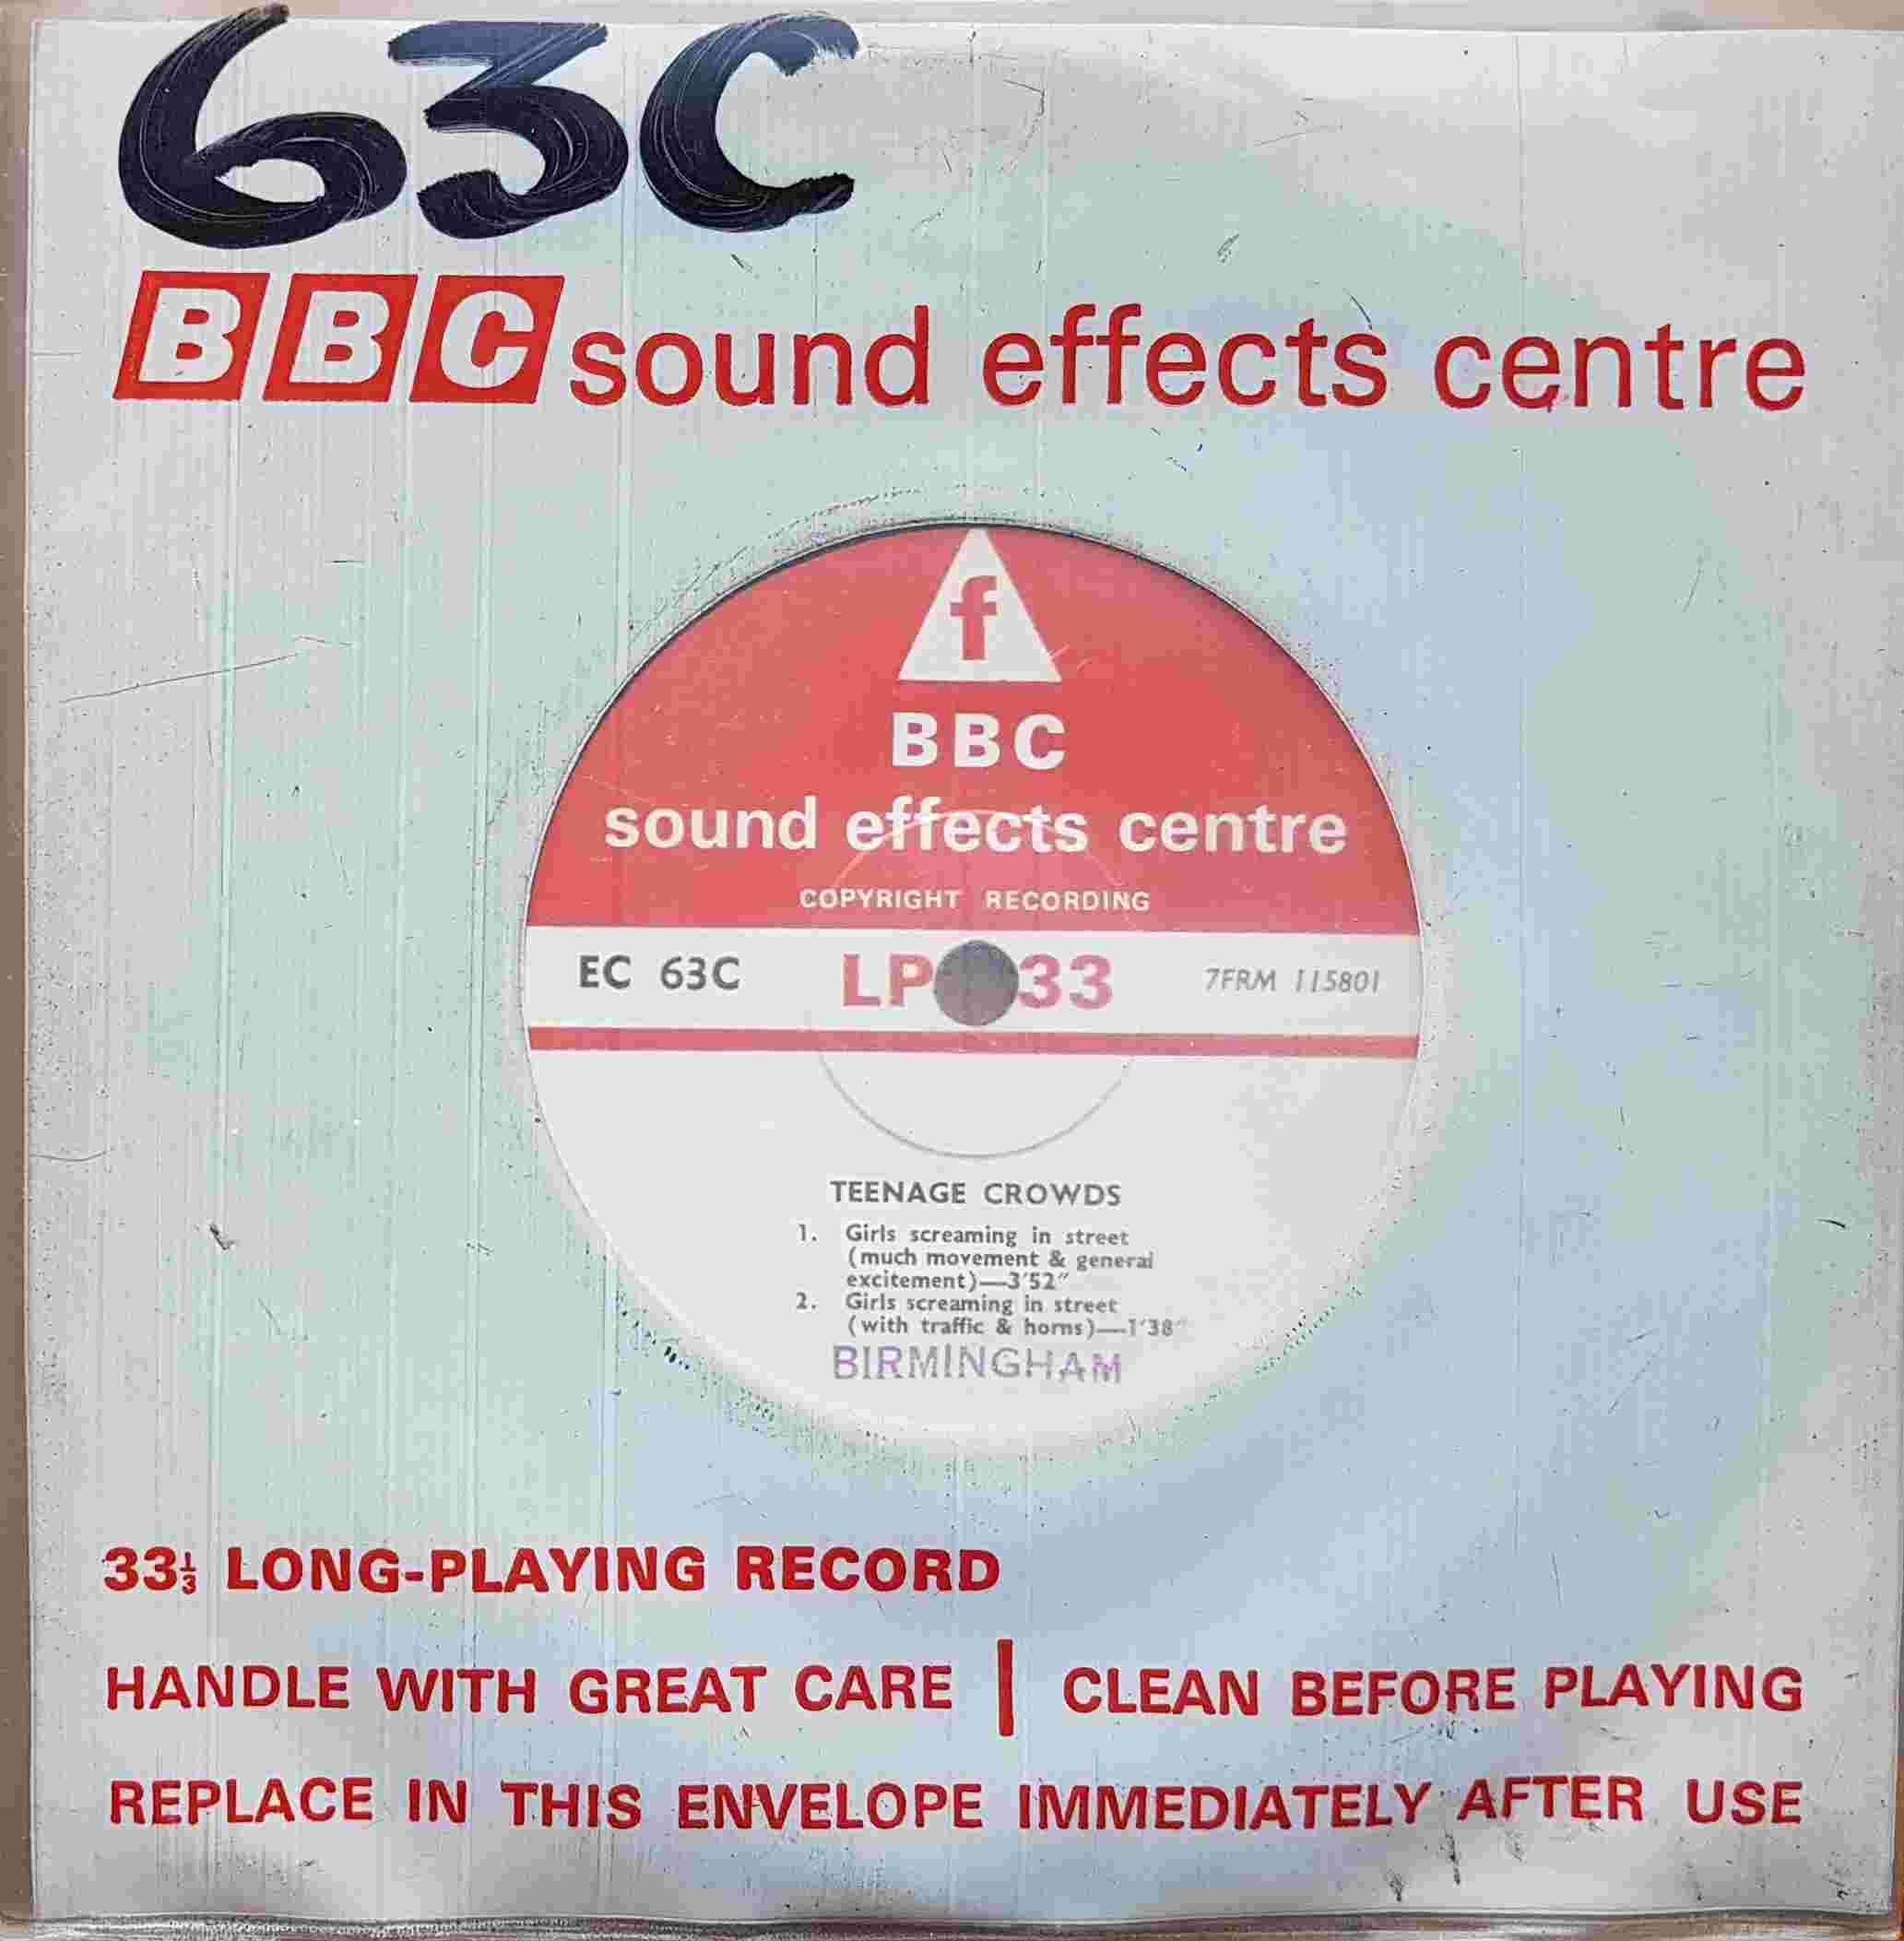 Picture of EC 63C Teenage crowds by artist Not registered from the BBC records and Tapes library